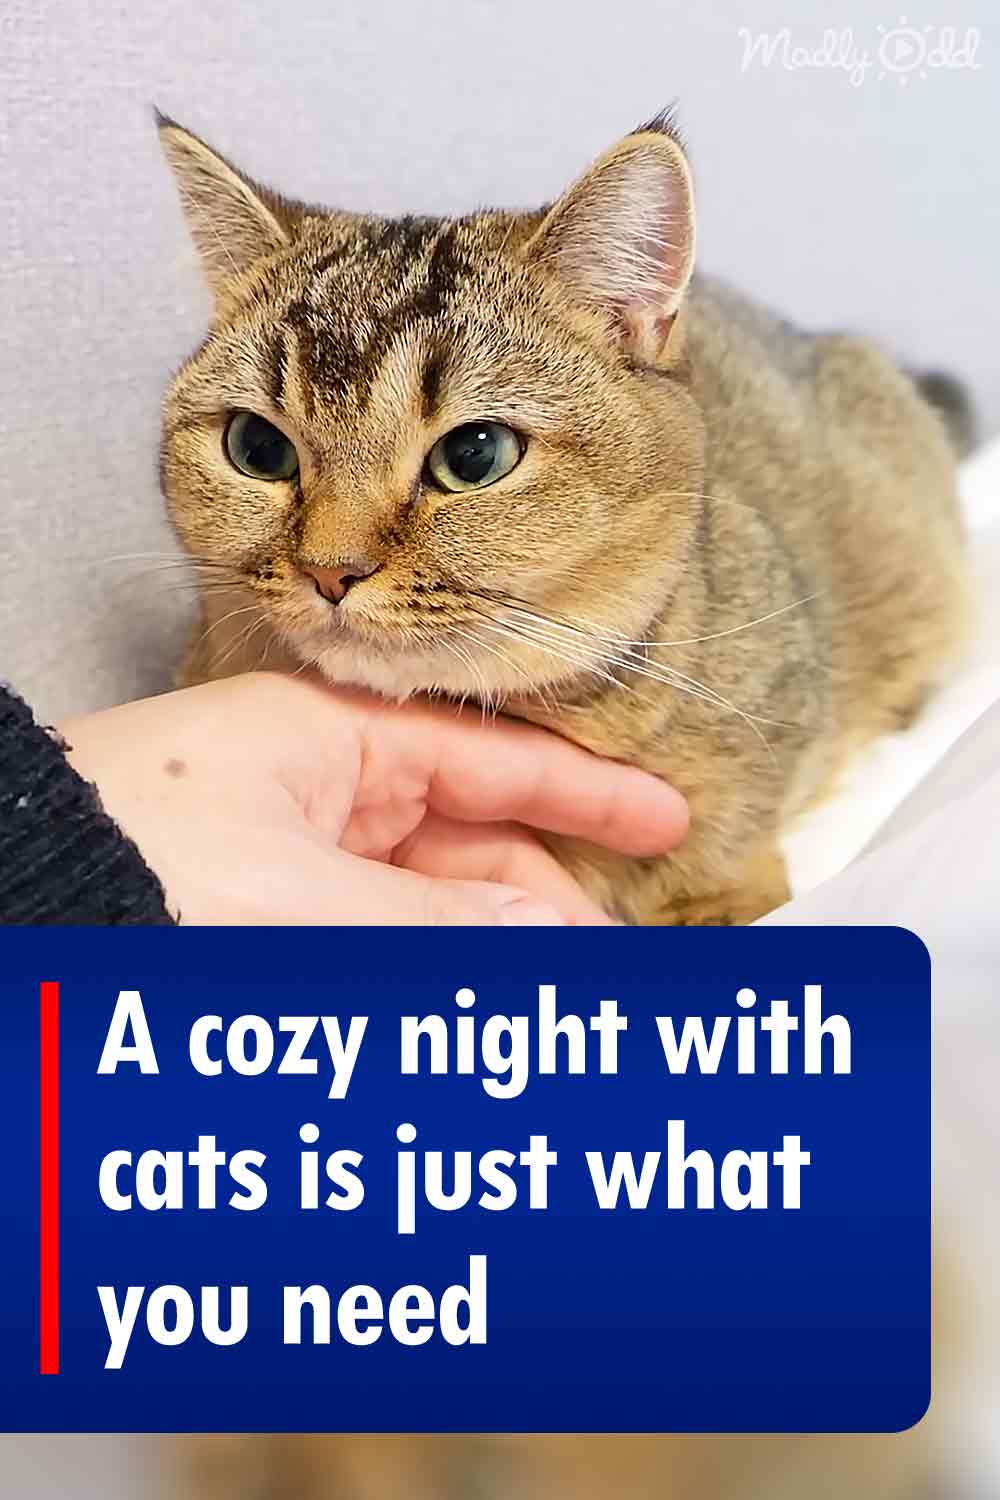 A cozy night with cats is just what you need